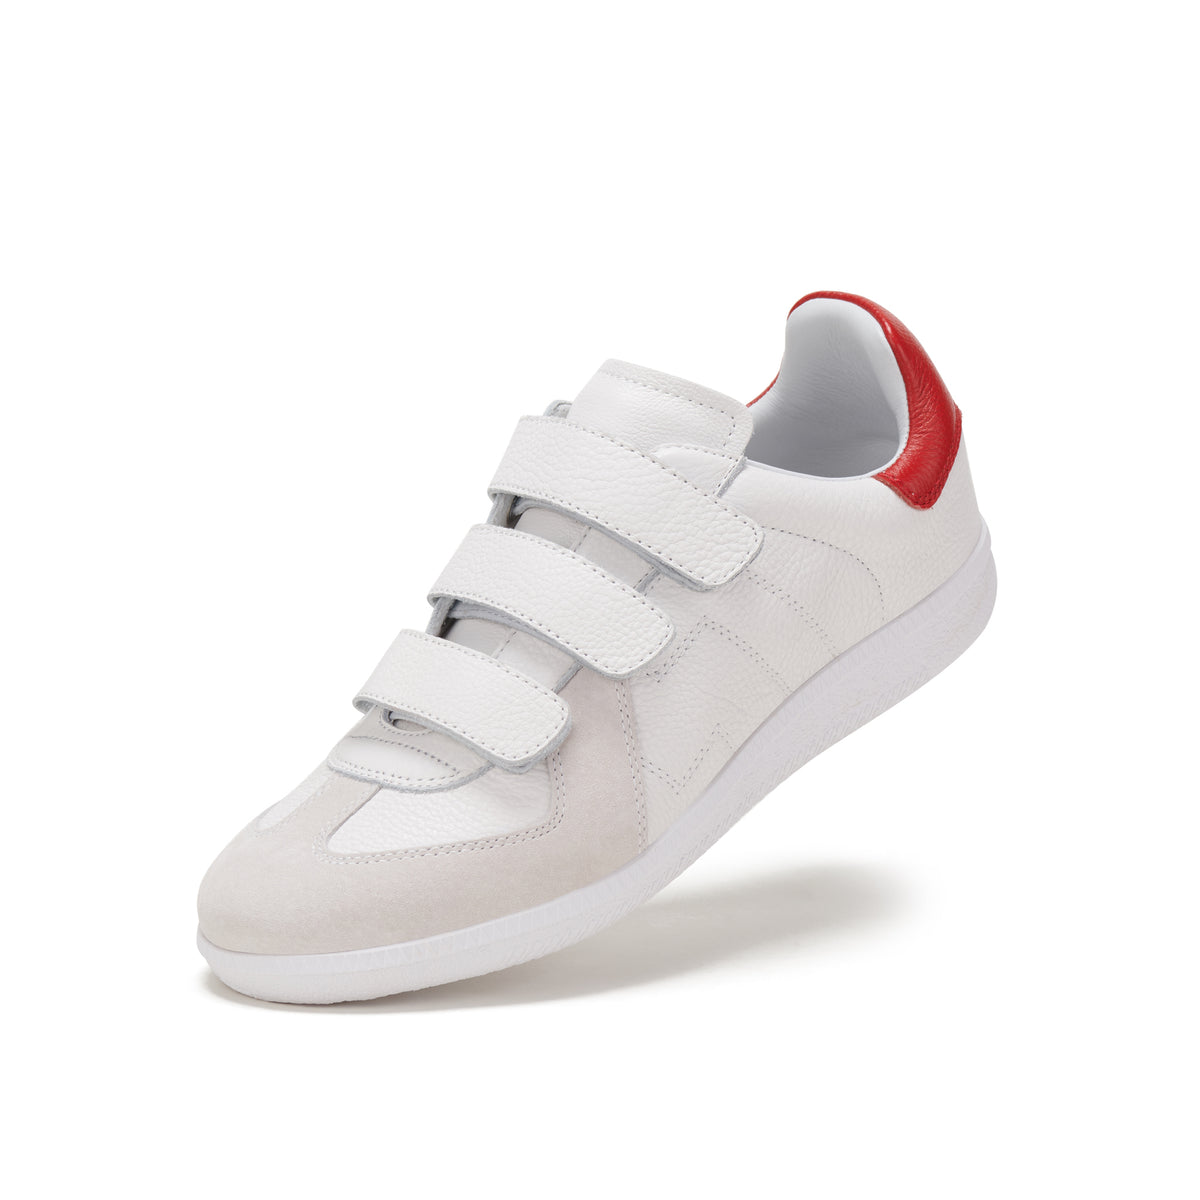 Pace Velcro Strap White/Red